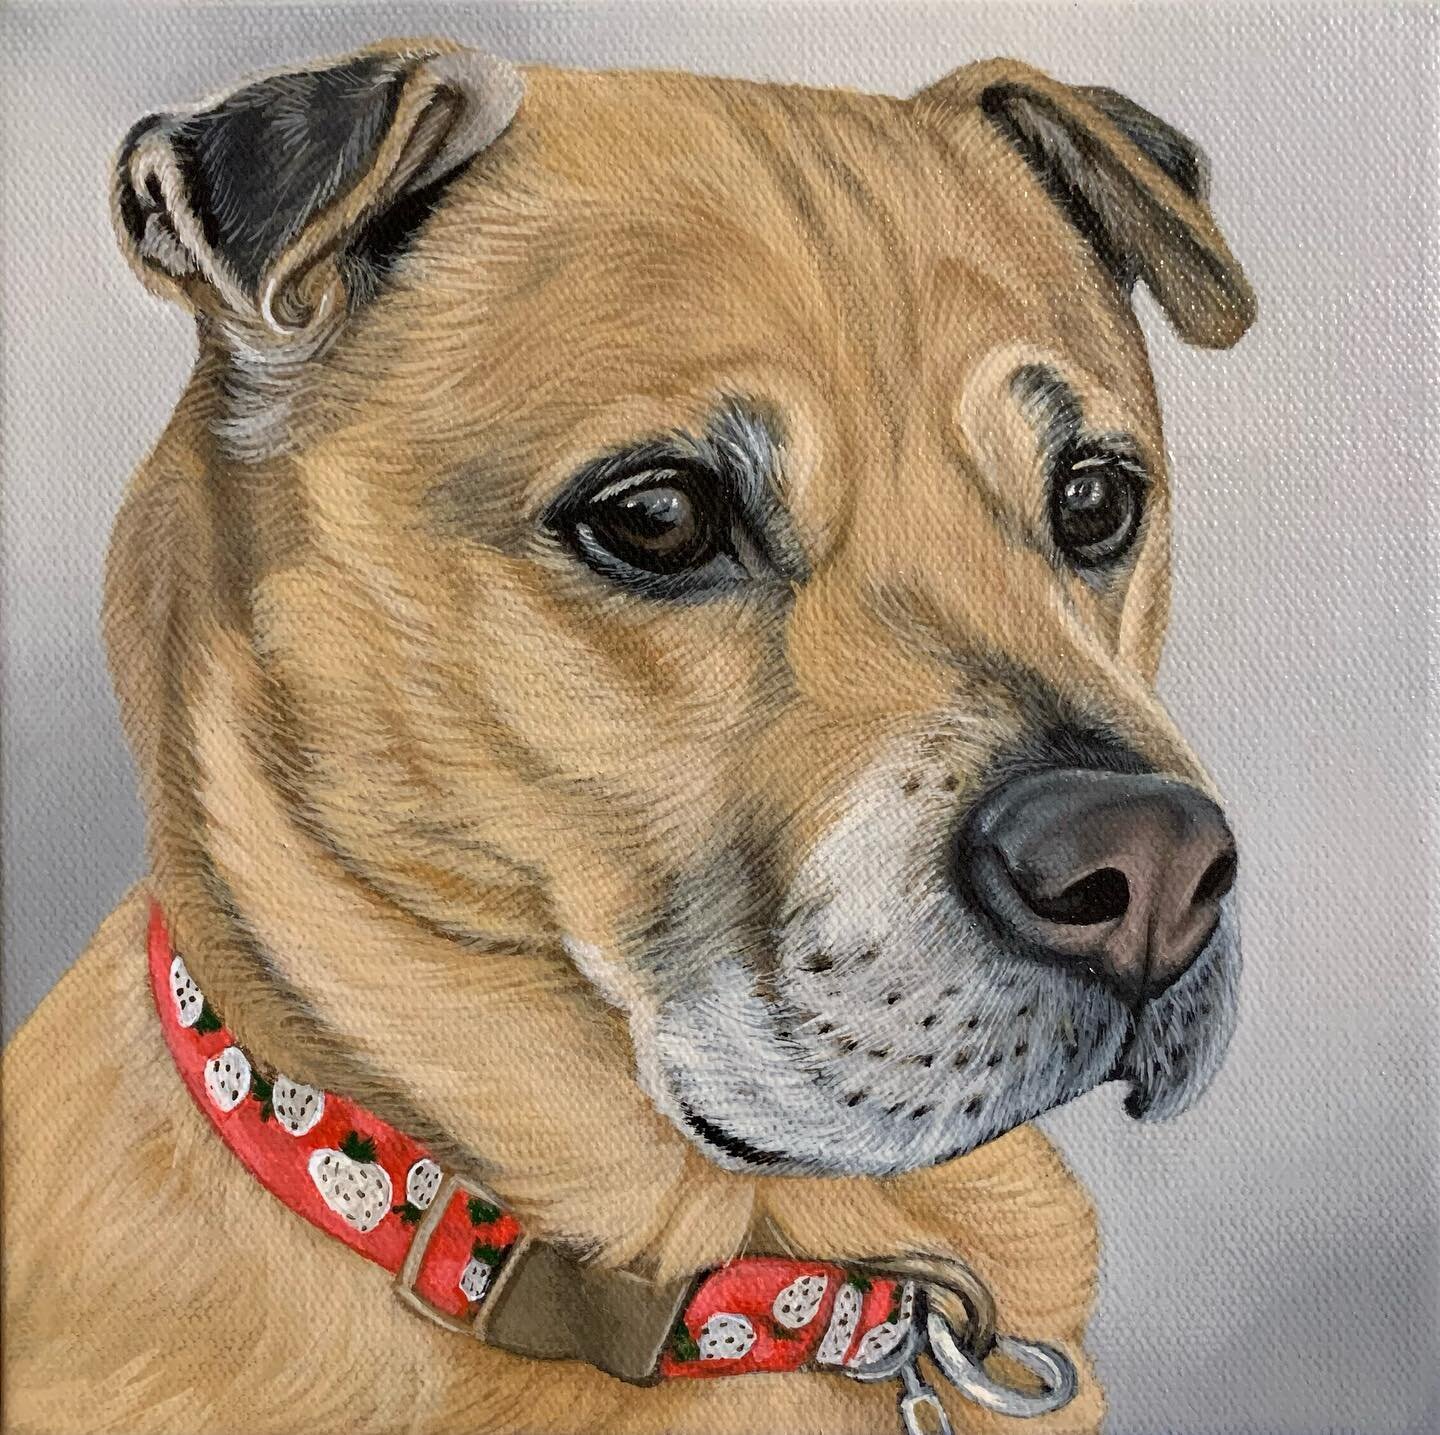 Meeka ❤️ The original photo is of her standing guard while her little humans play at the park. Taking her duty very seriously but then she is also very much this (Swipe 👉🏻)! 

#guarddog #petsofinstagram #petsagram #artistsoninstagram #petportraitar